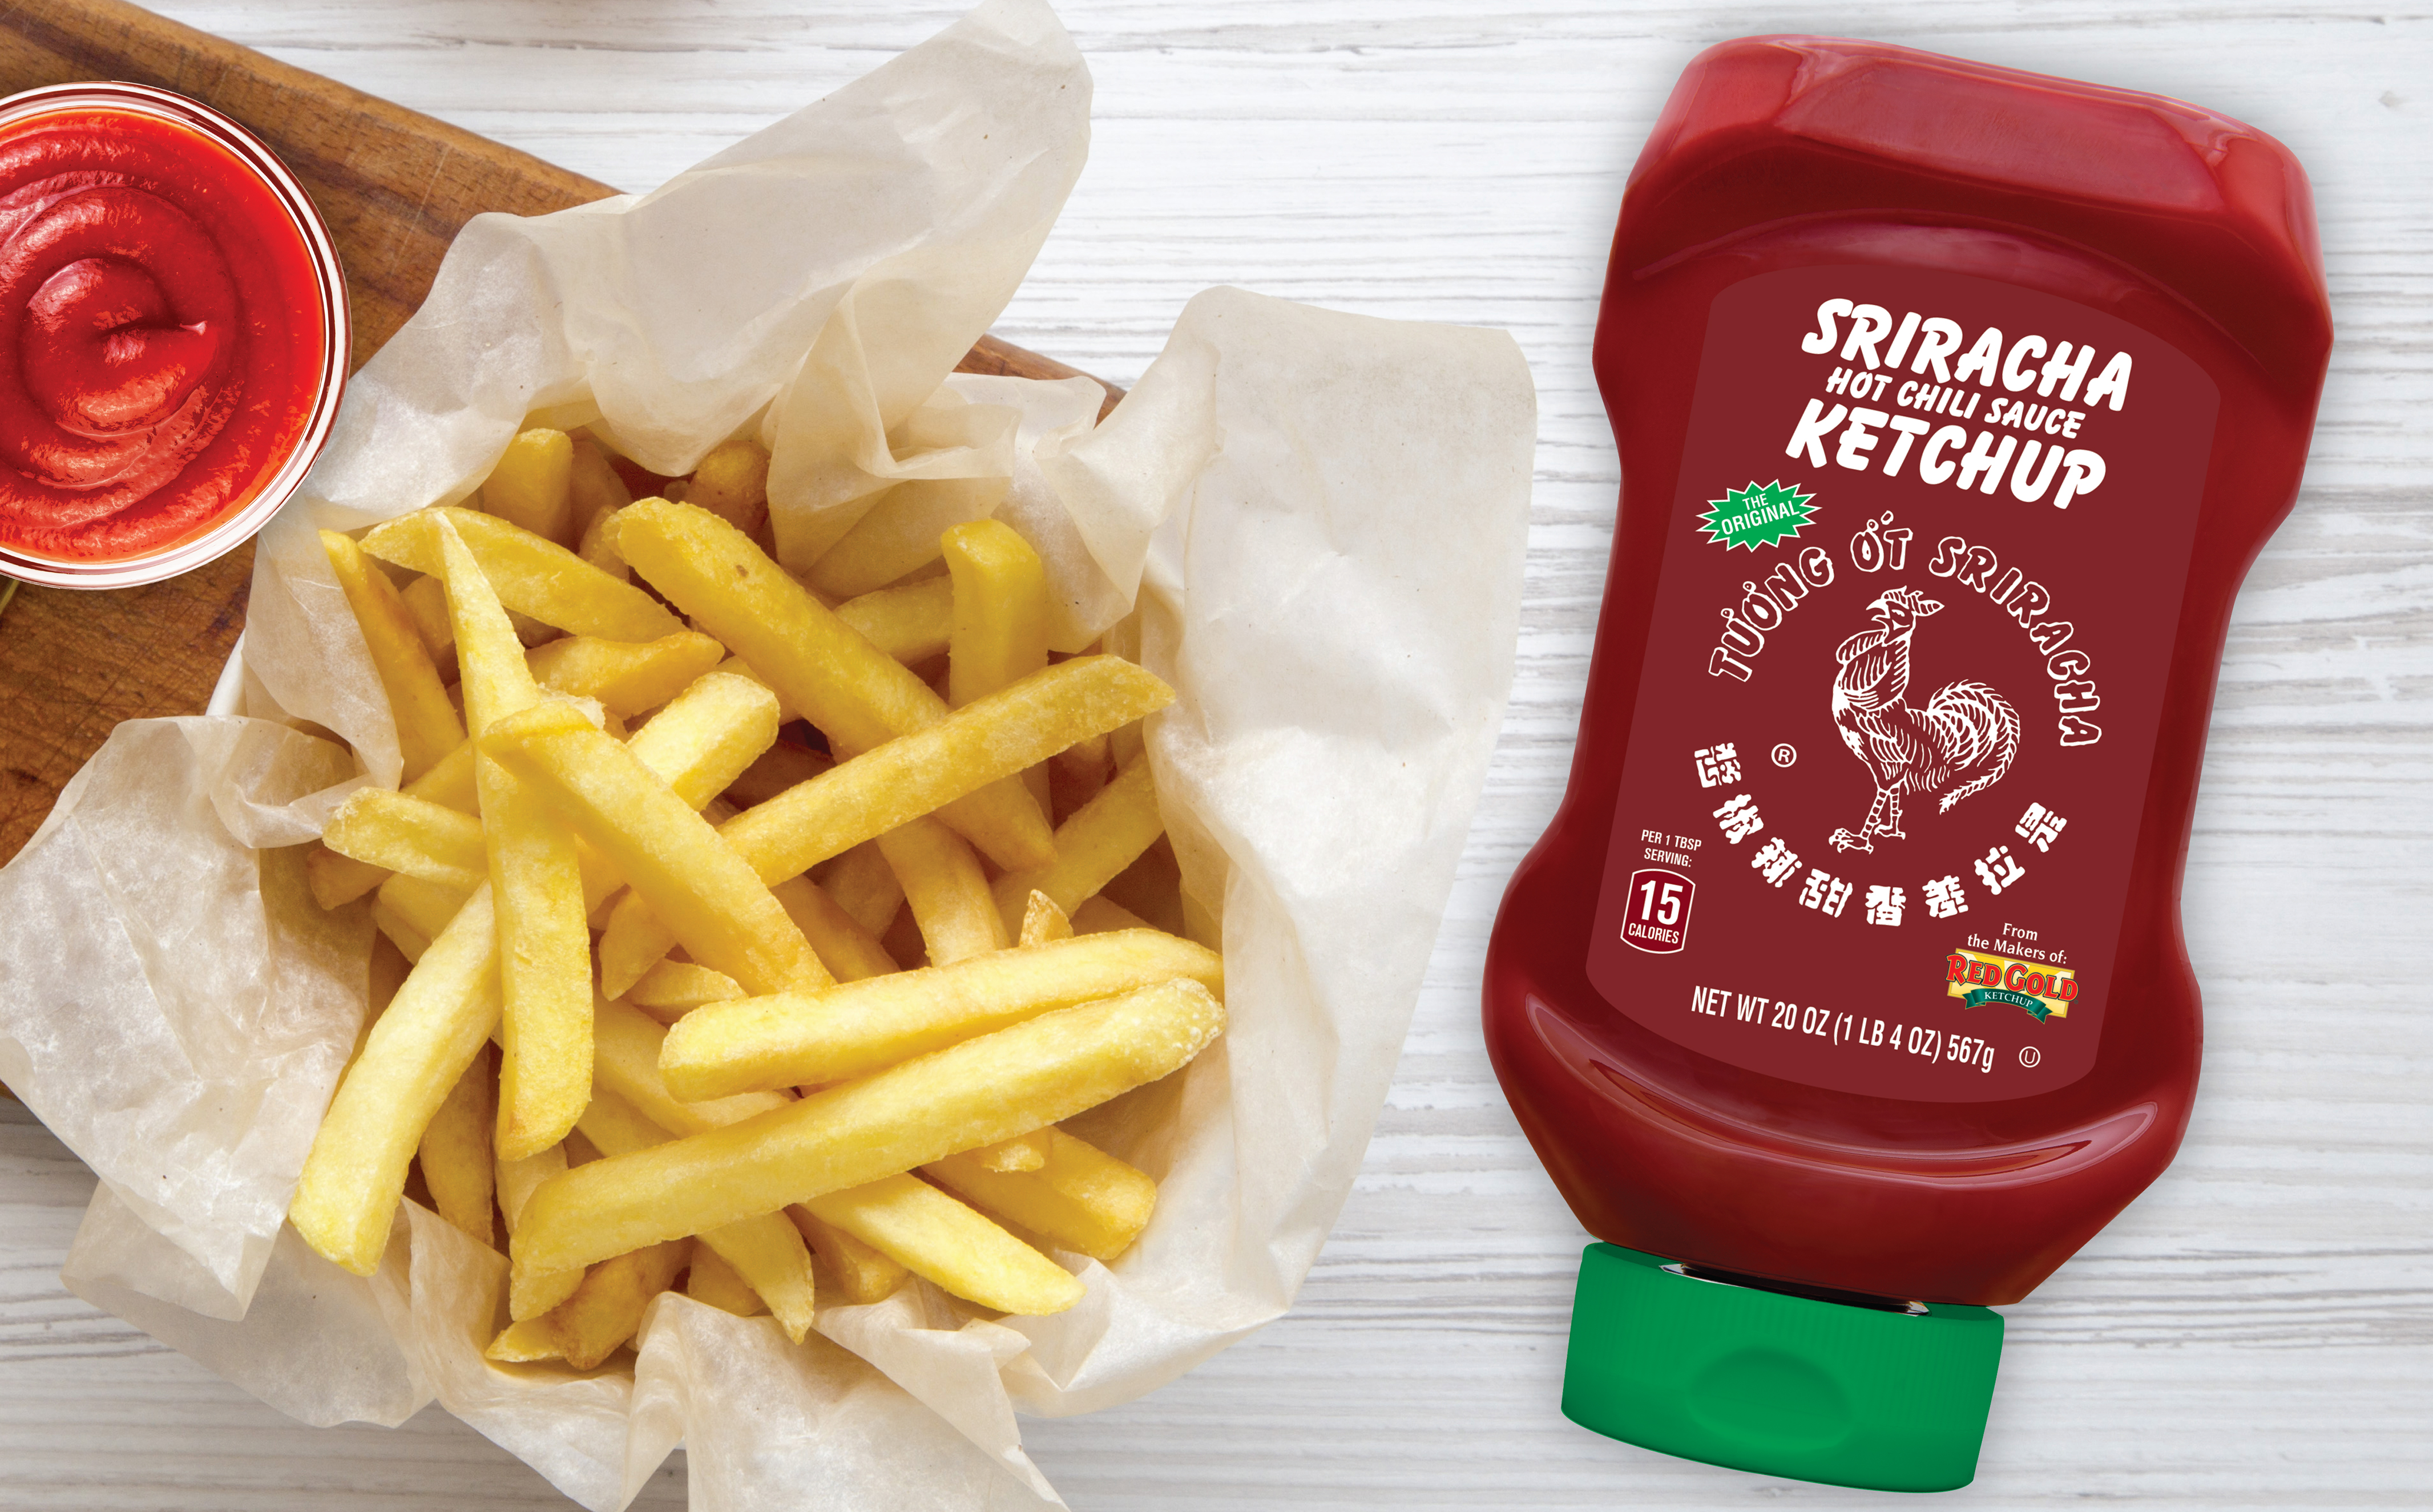 Image of red gold sriracha ketchup and french fries